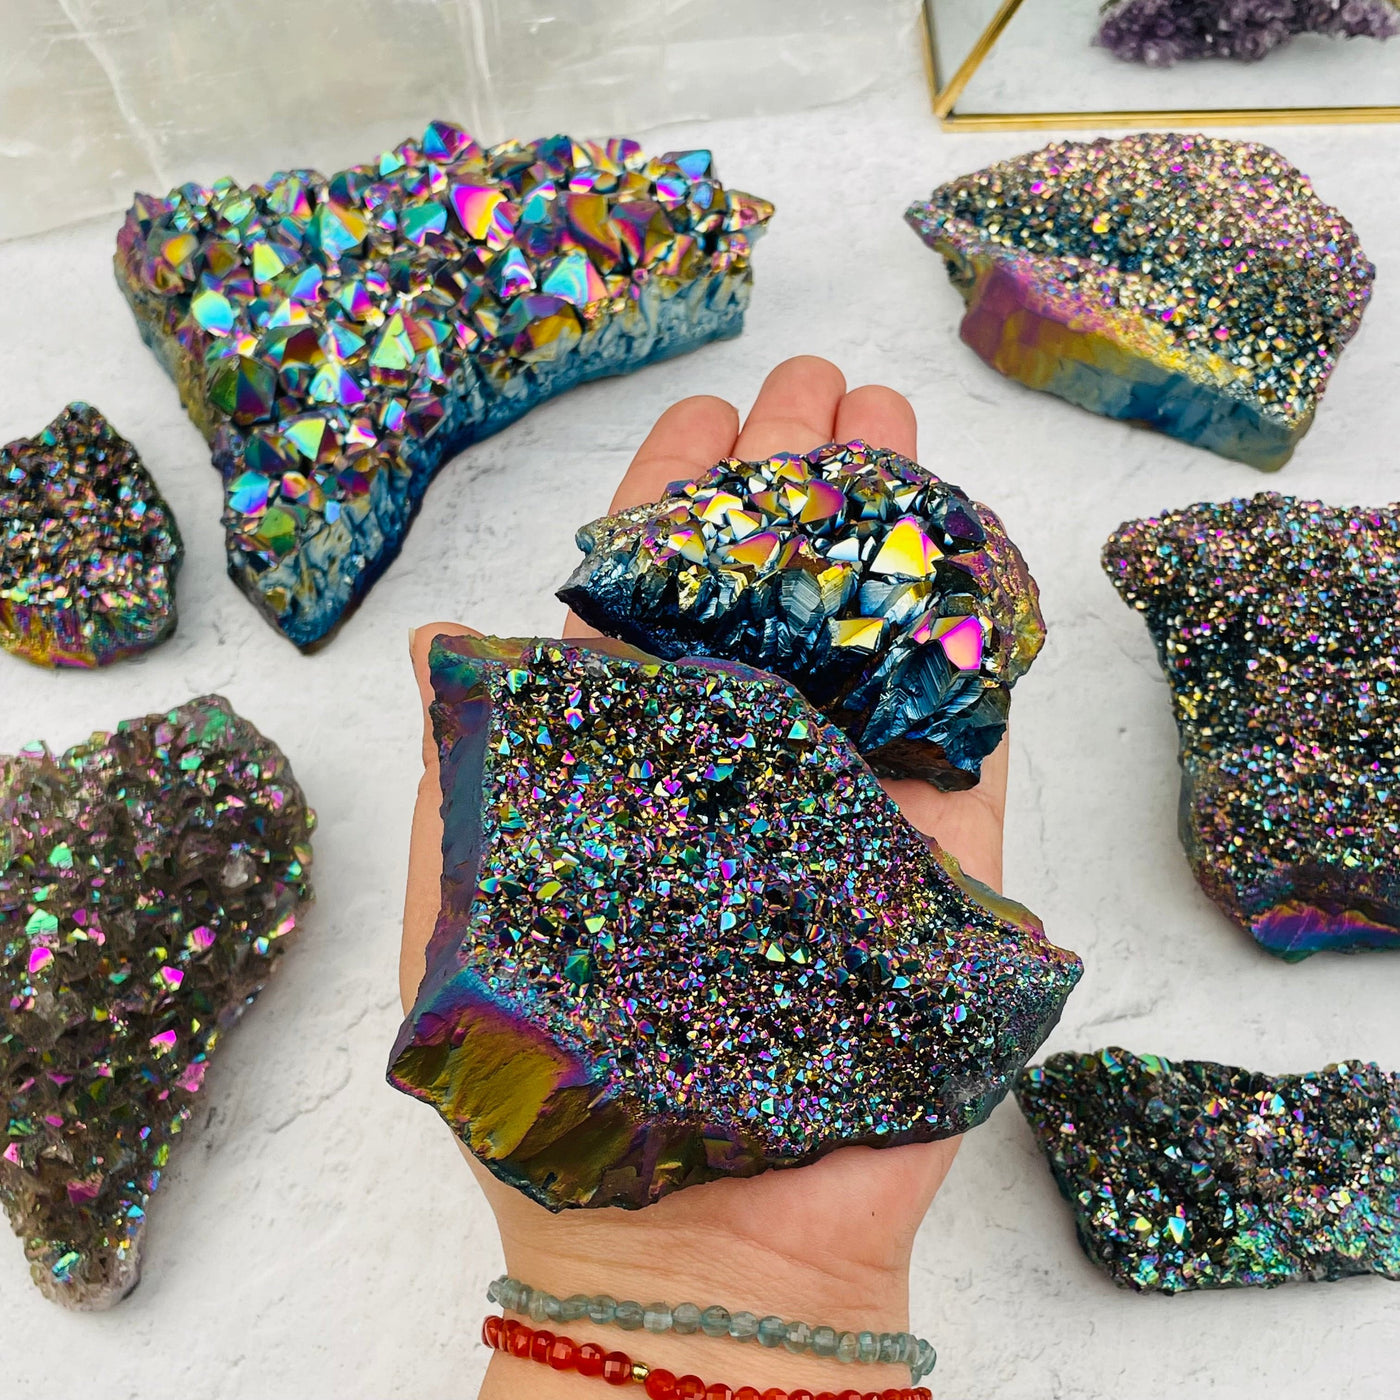 Amethyst Druzy Cluster with Rainbow Titanium Finish in hand for size reference 